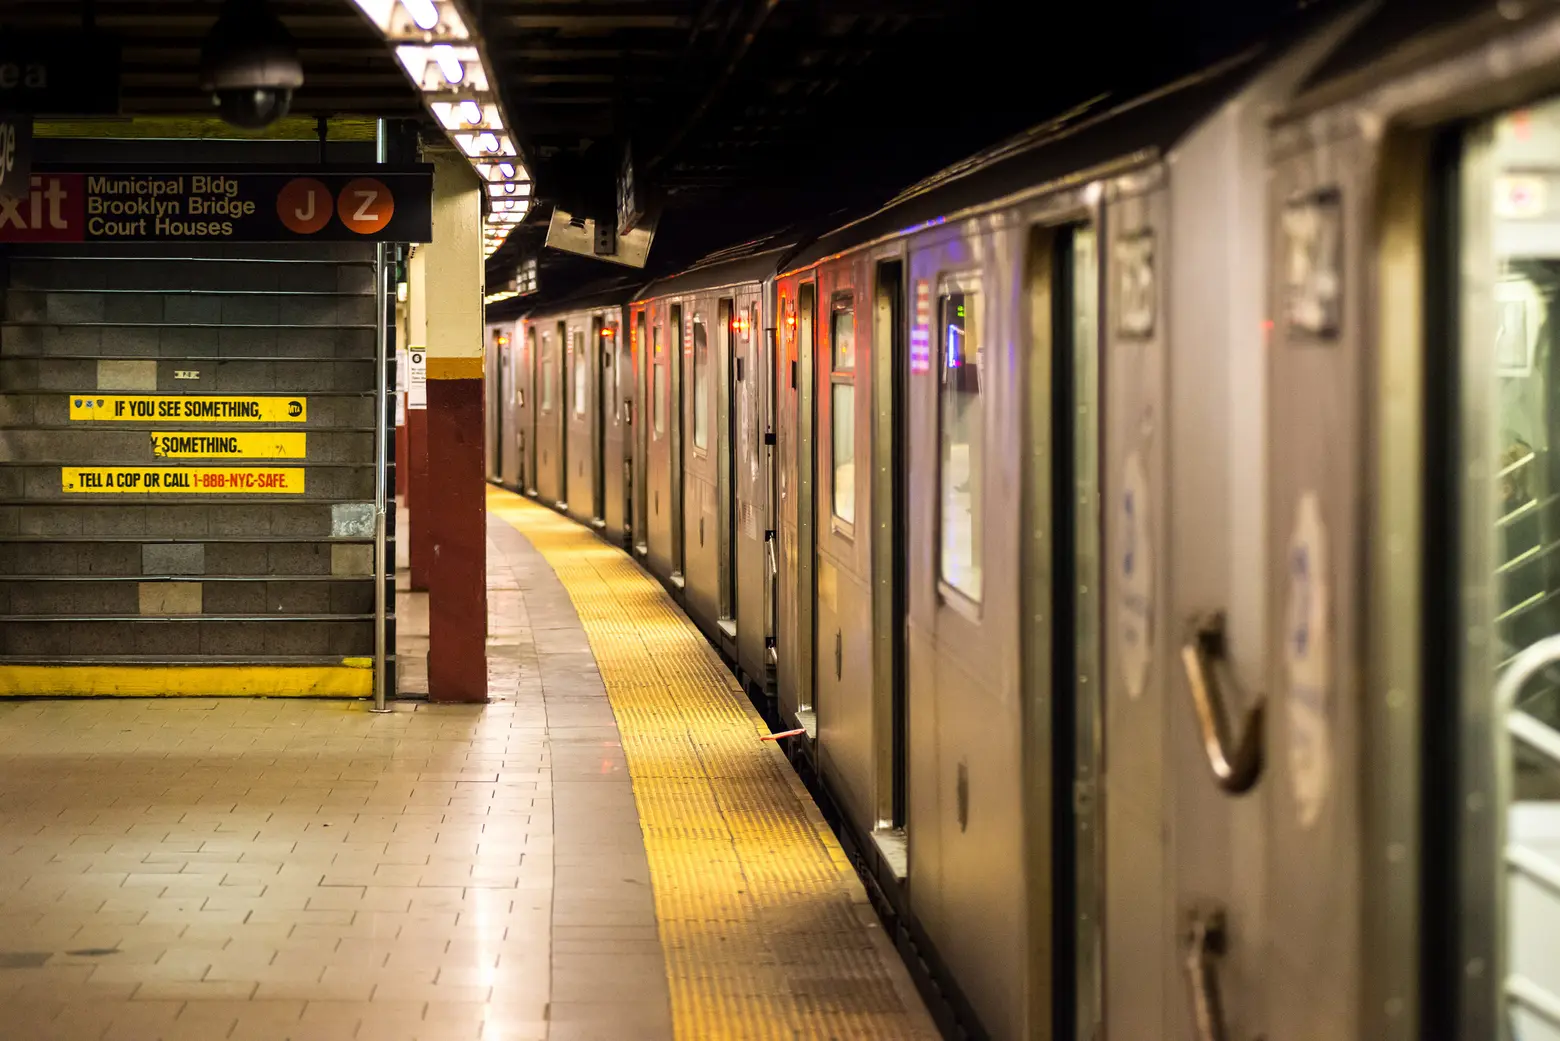 Study Says: The 4 Train Is the Worst Performing, the L Train the Best